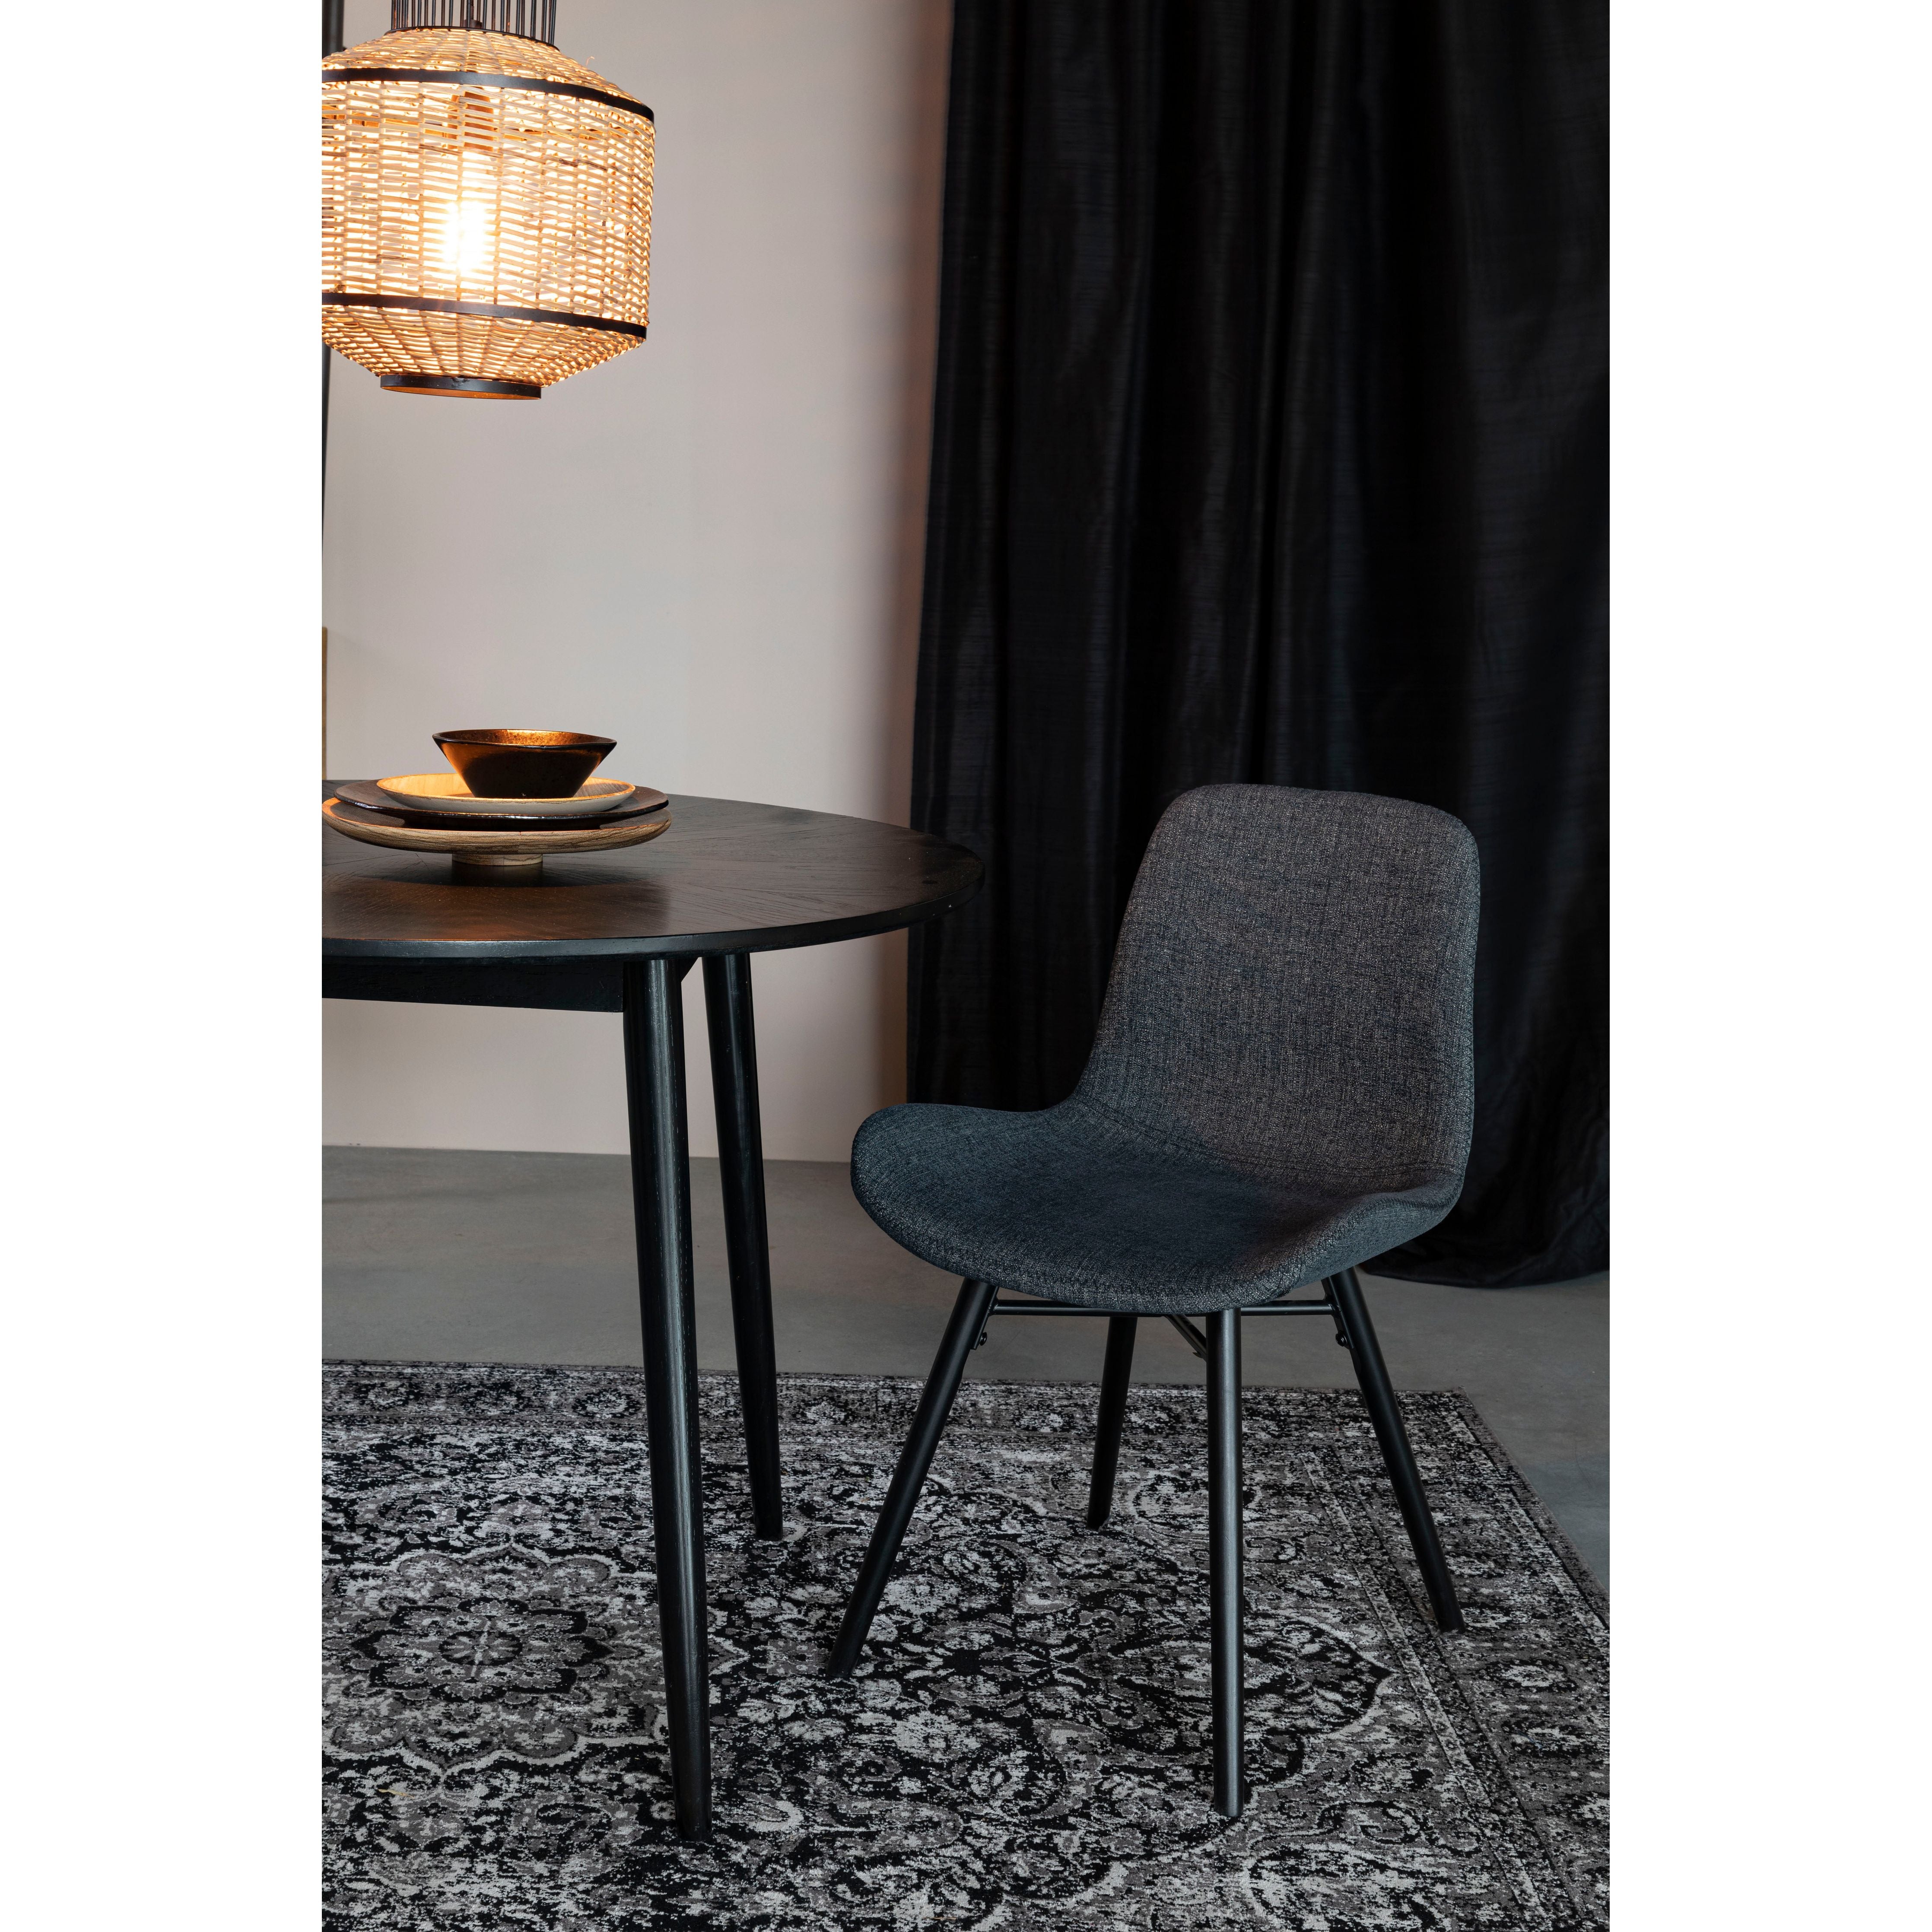 Chair lester anthracite | 2 pieces